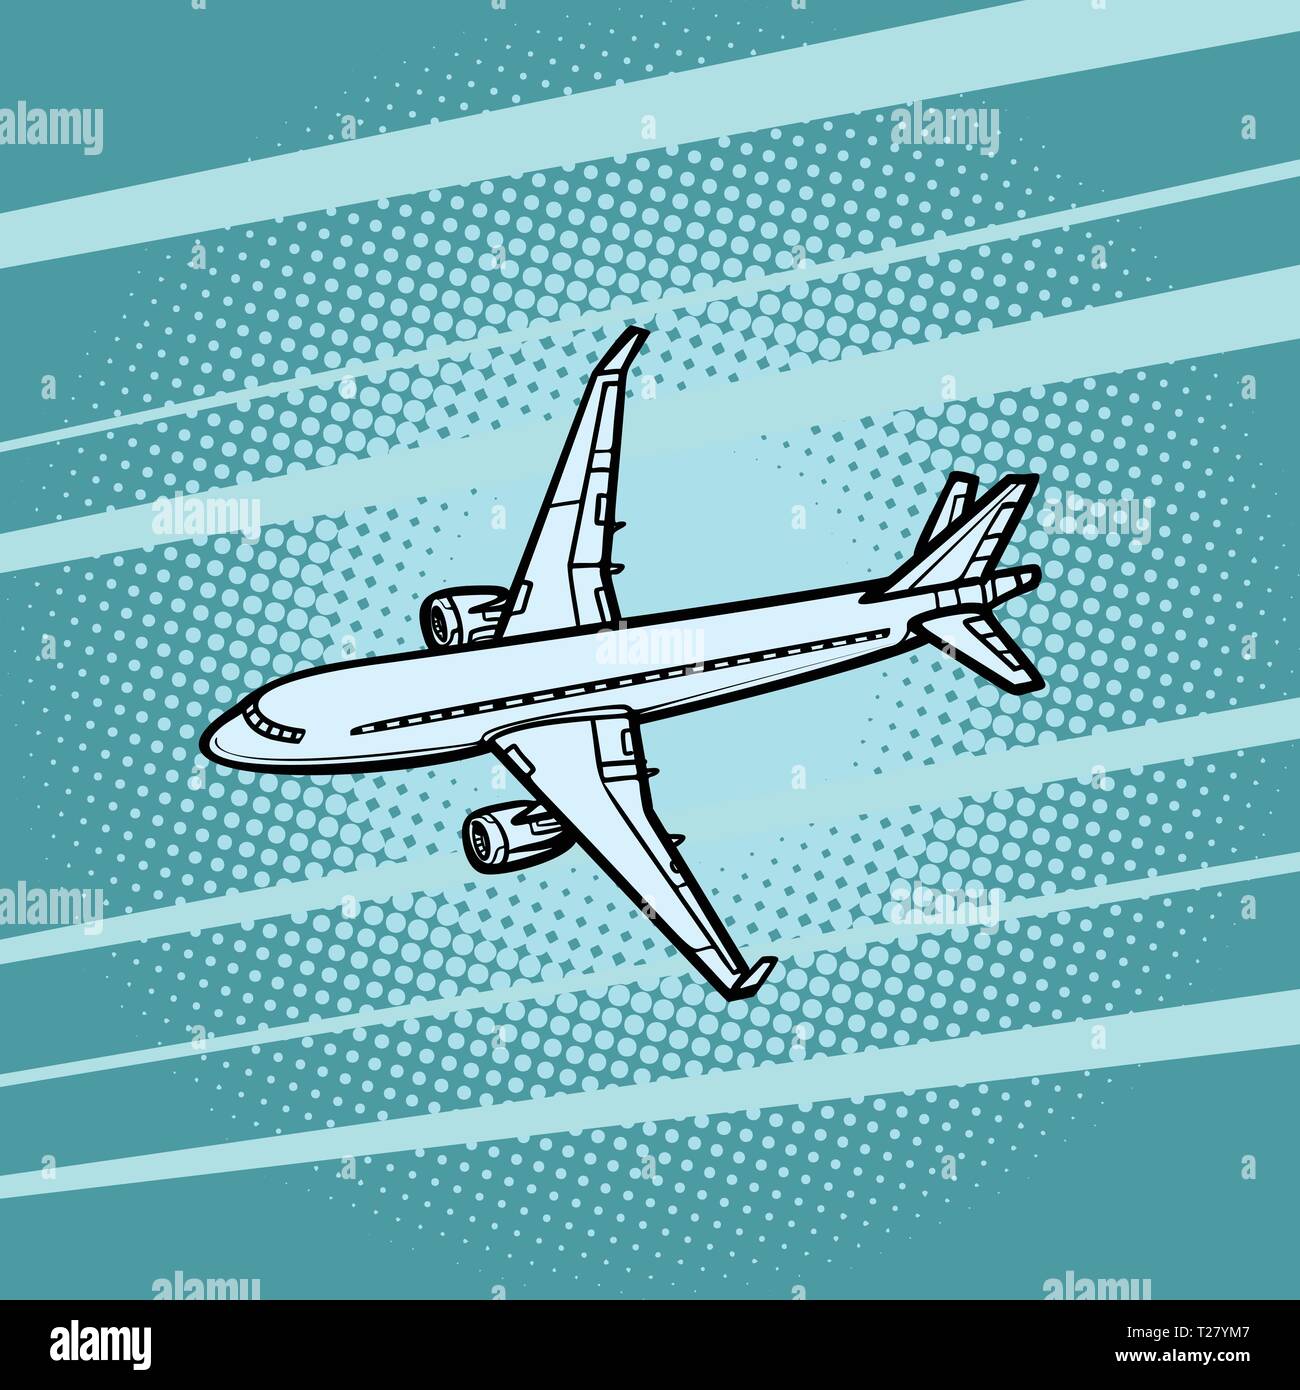 aircraft air transport blue background Stock Vector